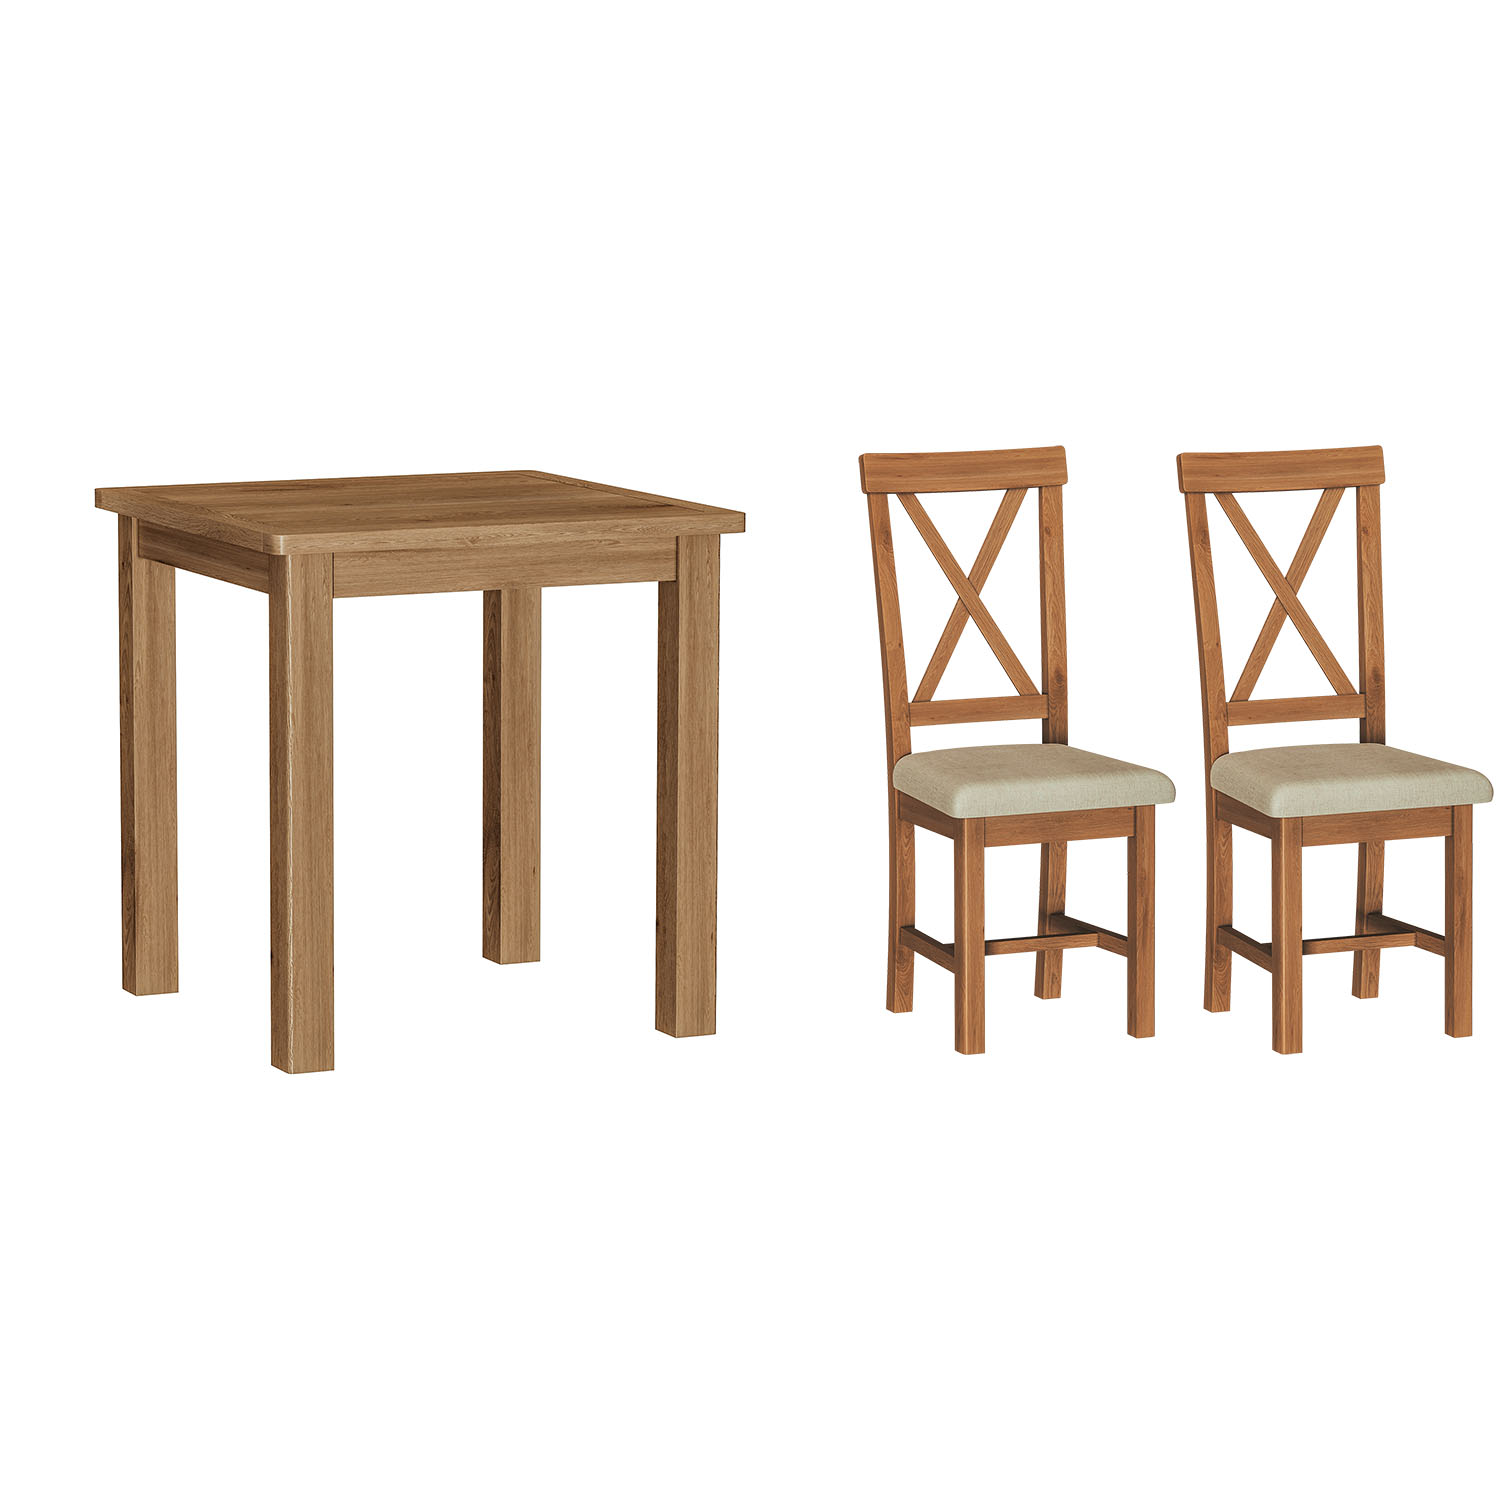 Chiltern Oak Fixed Top Table and x2 Chairs Set